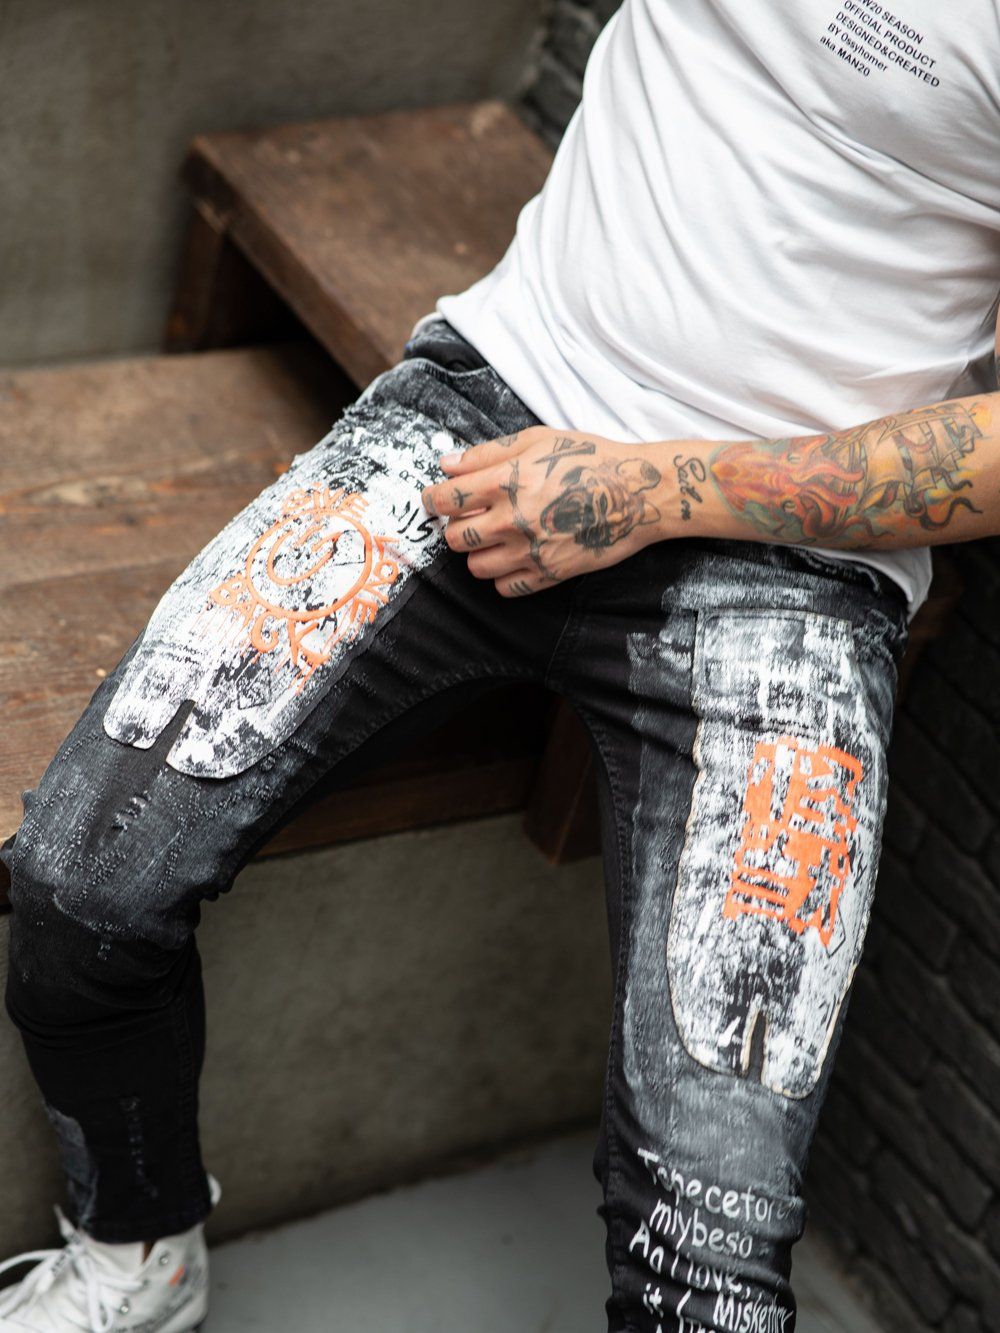 A man sitting on a SIXTY SIX bench with tattoos on his legs.